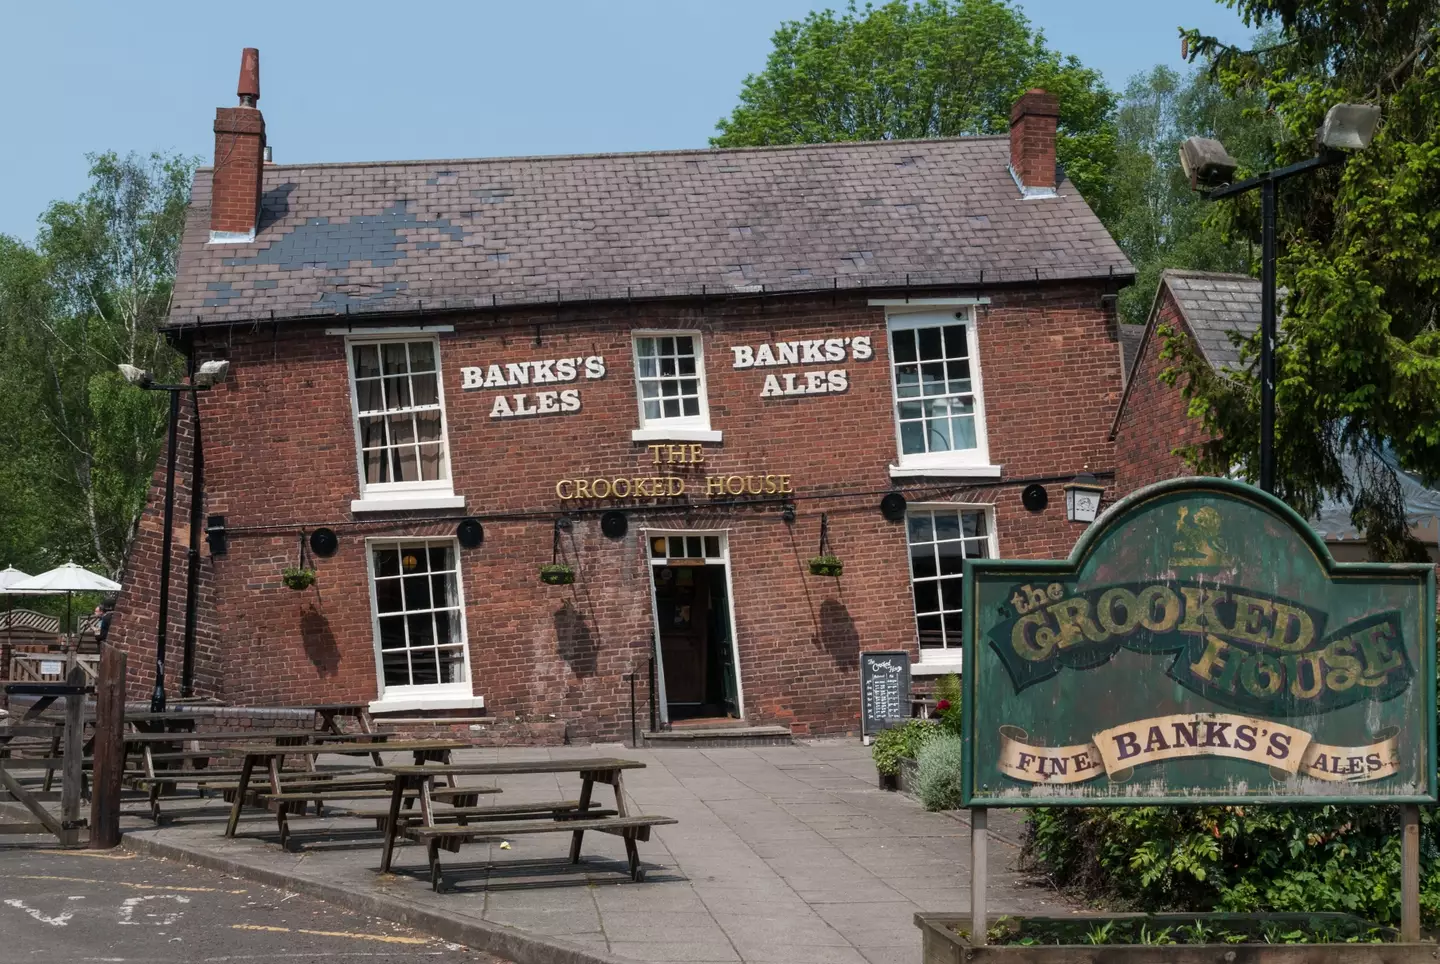 Police are treating the fire at the famous Crooked House pub as arson.